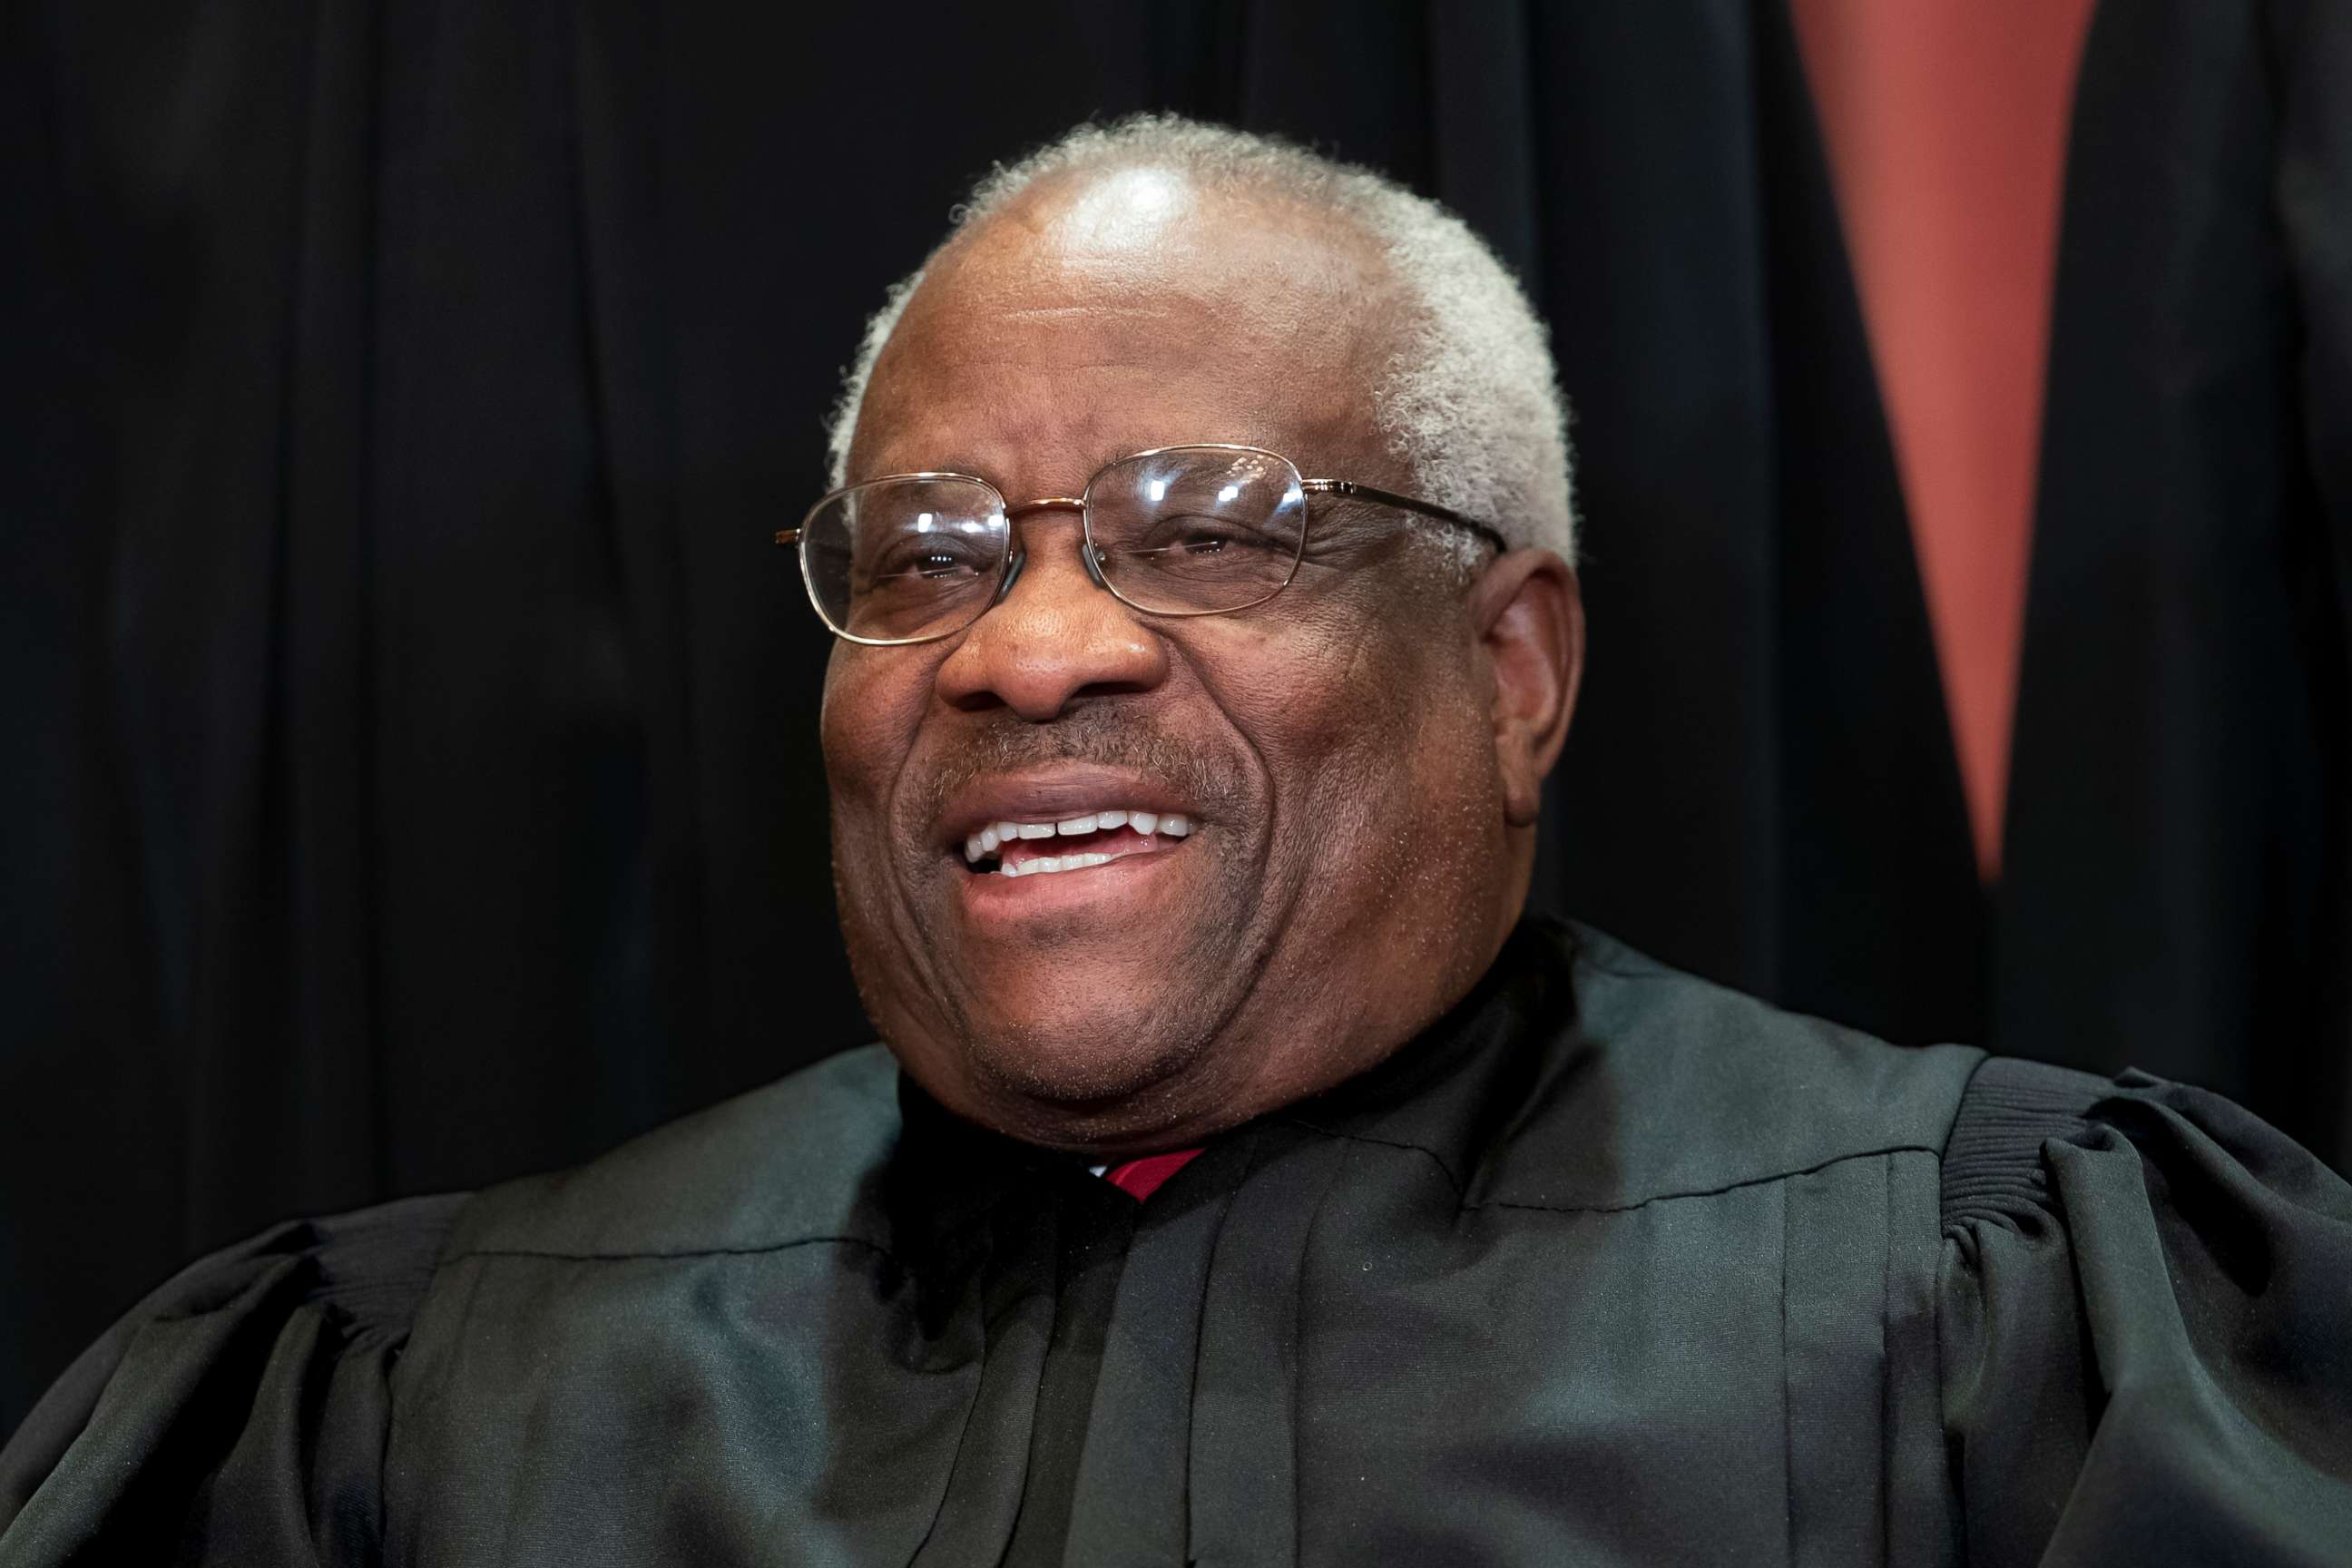 PHOTO: In this Nov. 30, 2018 photo, Supreme Court Associate Justice Clarence Thomas sits for a group portrait at the Supreme Court Building in Washington. 